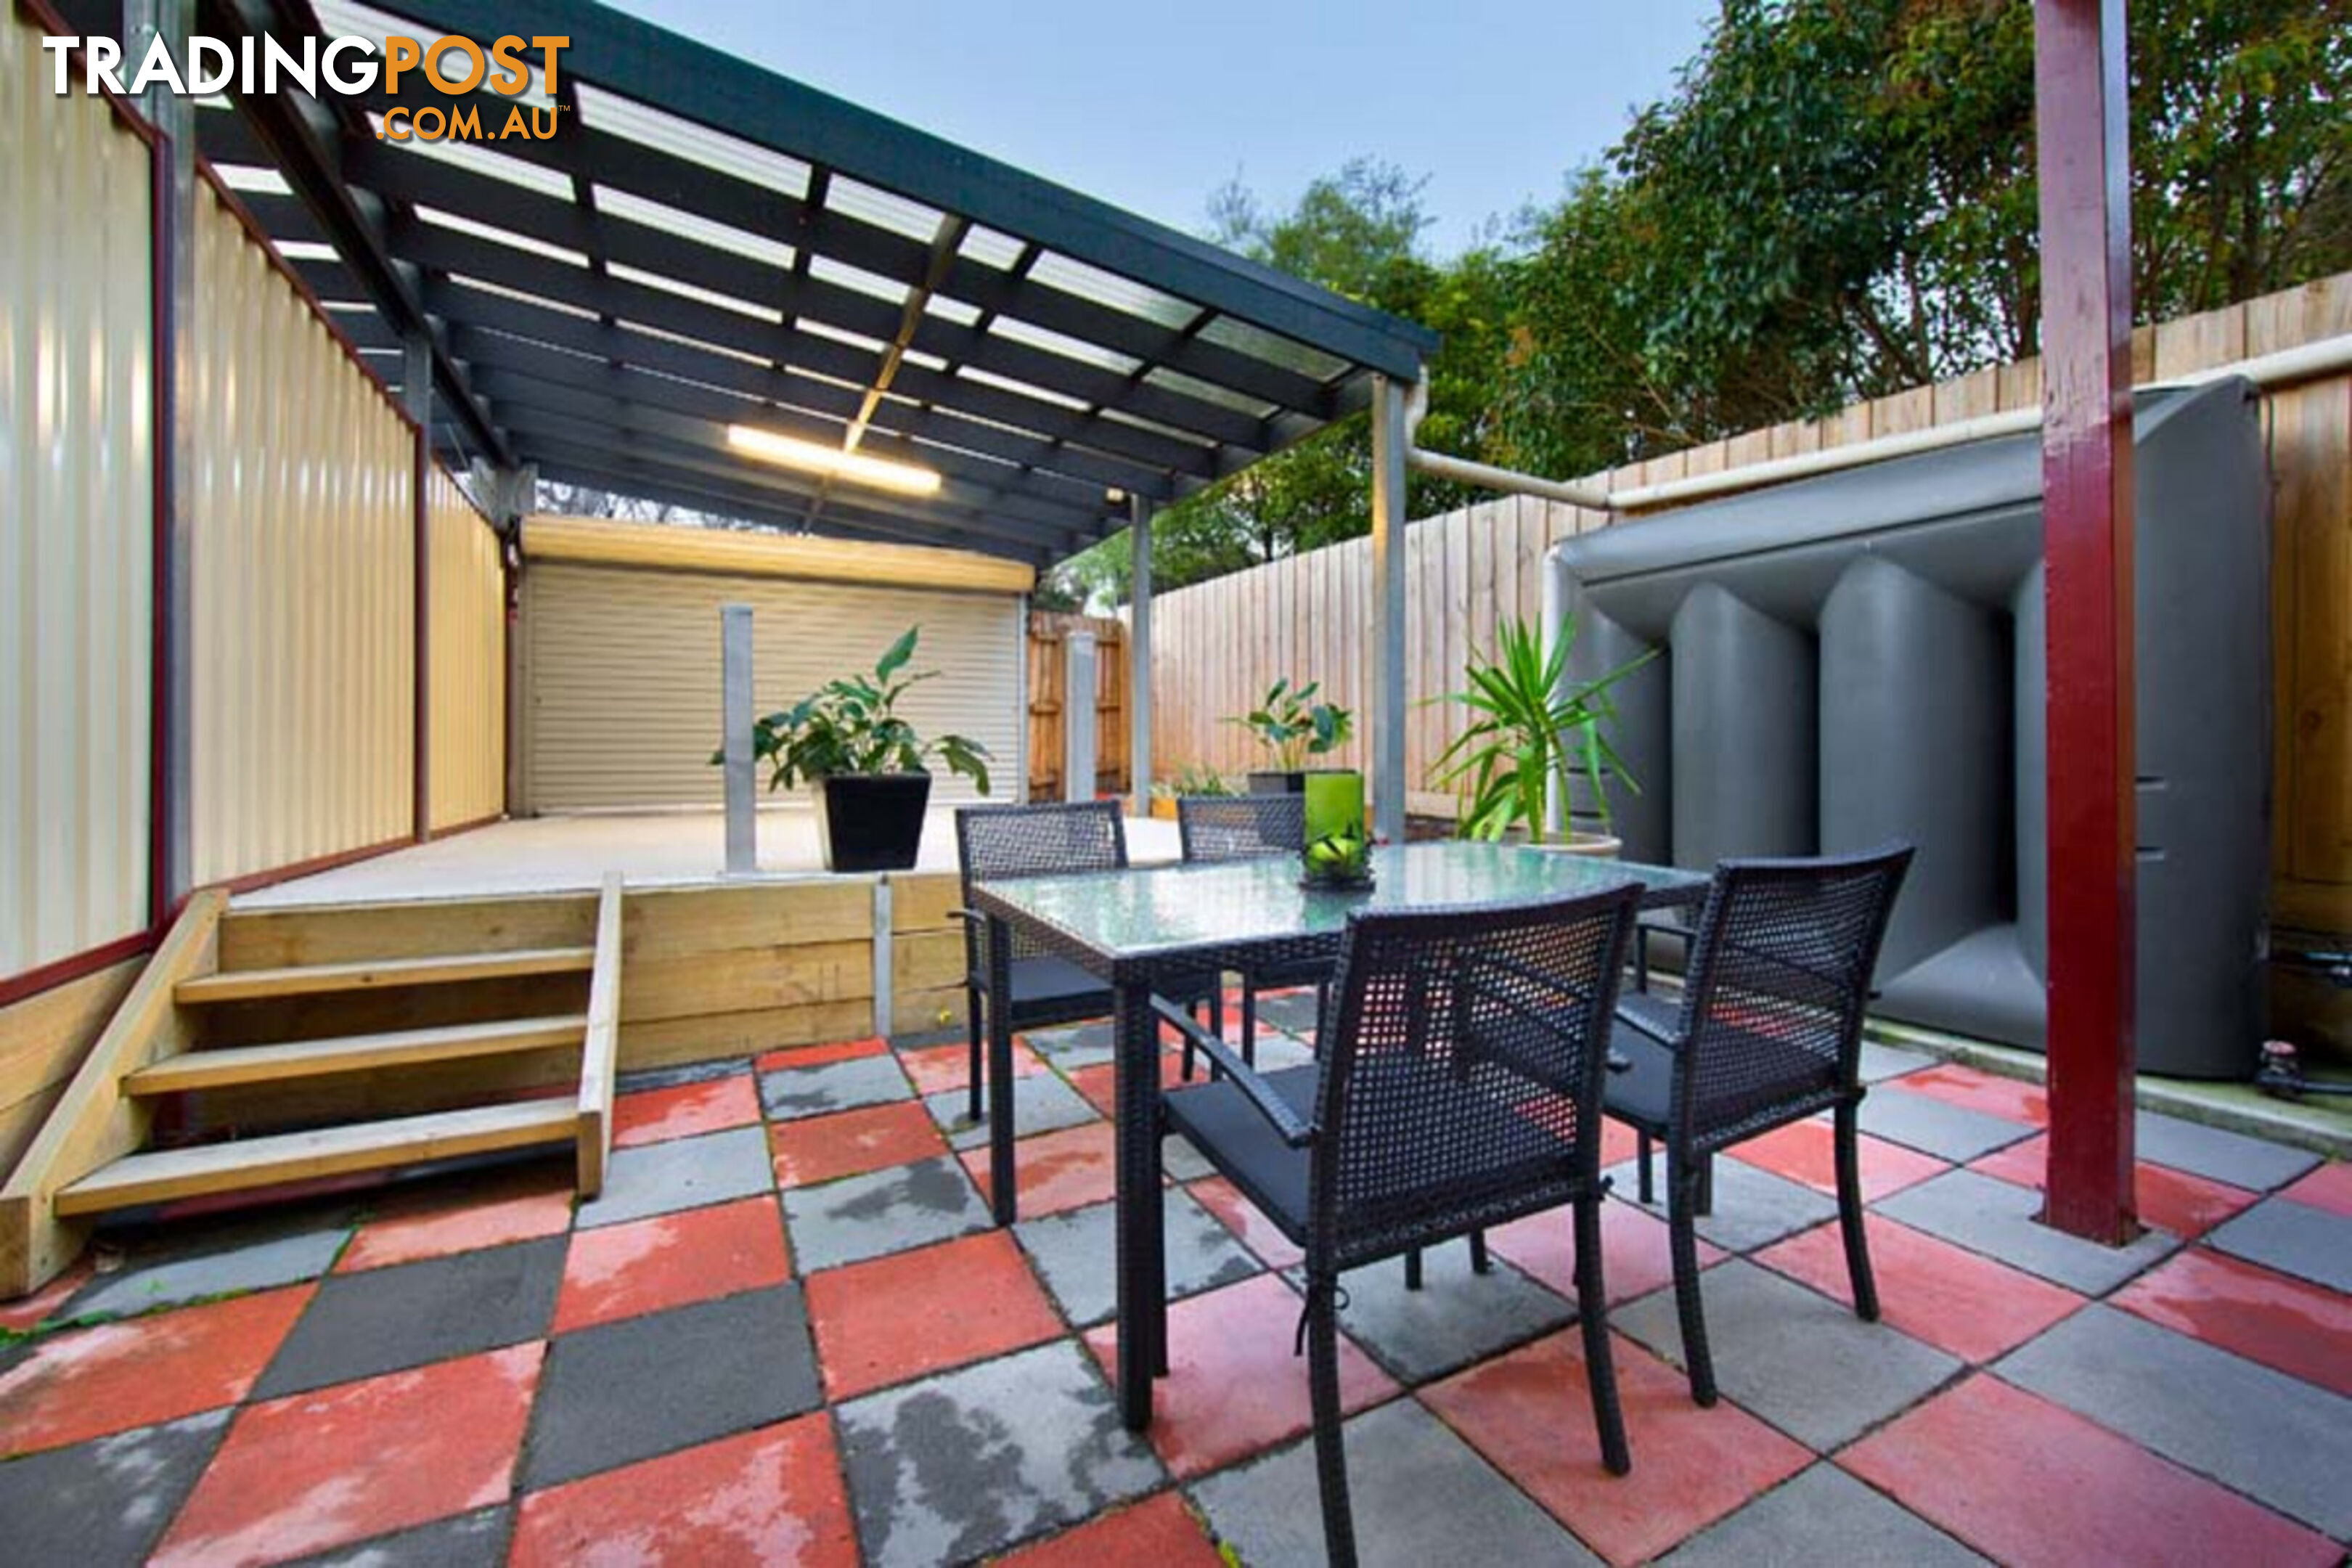 32 Noone Street Clifton Hill VIC 3068